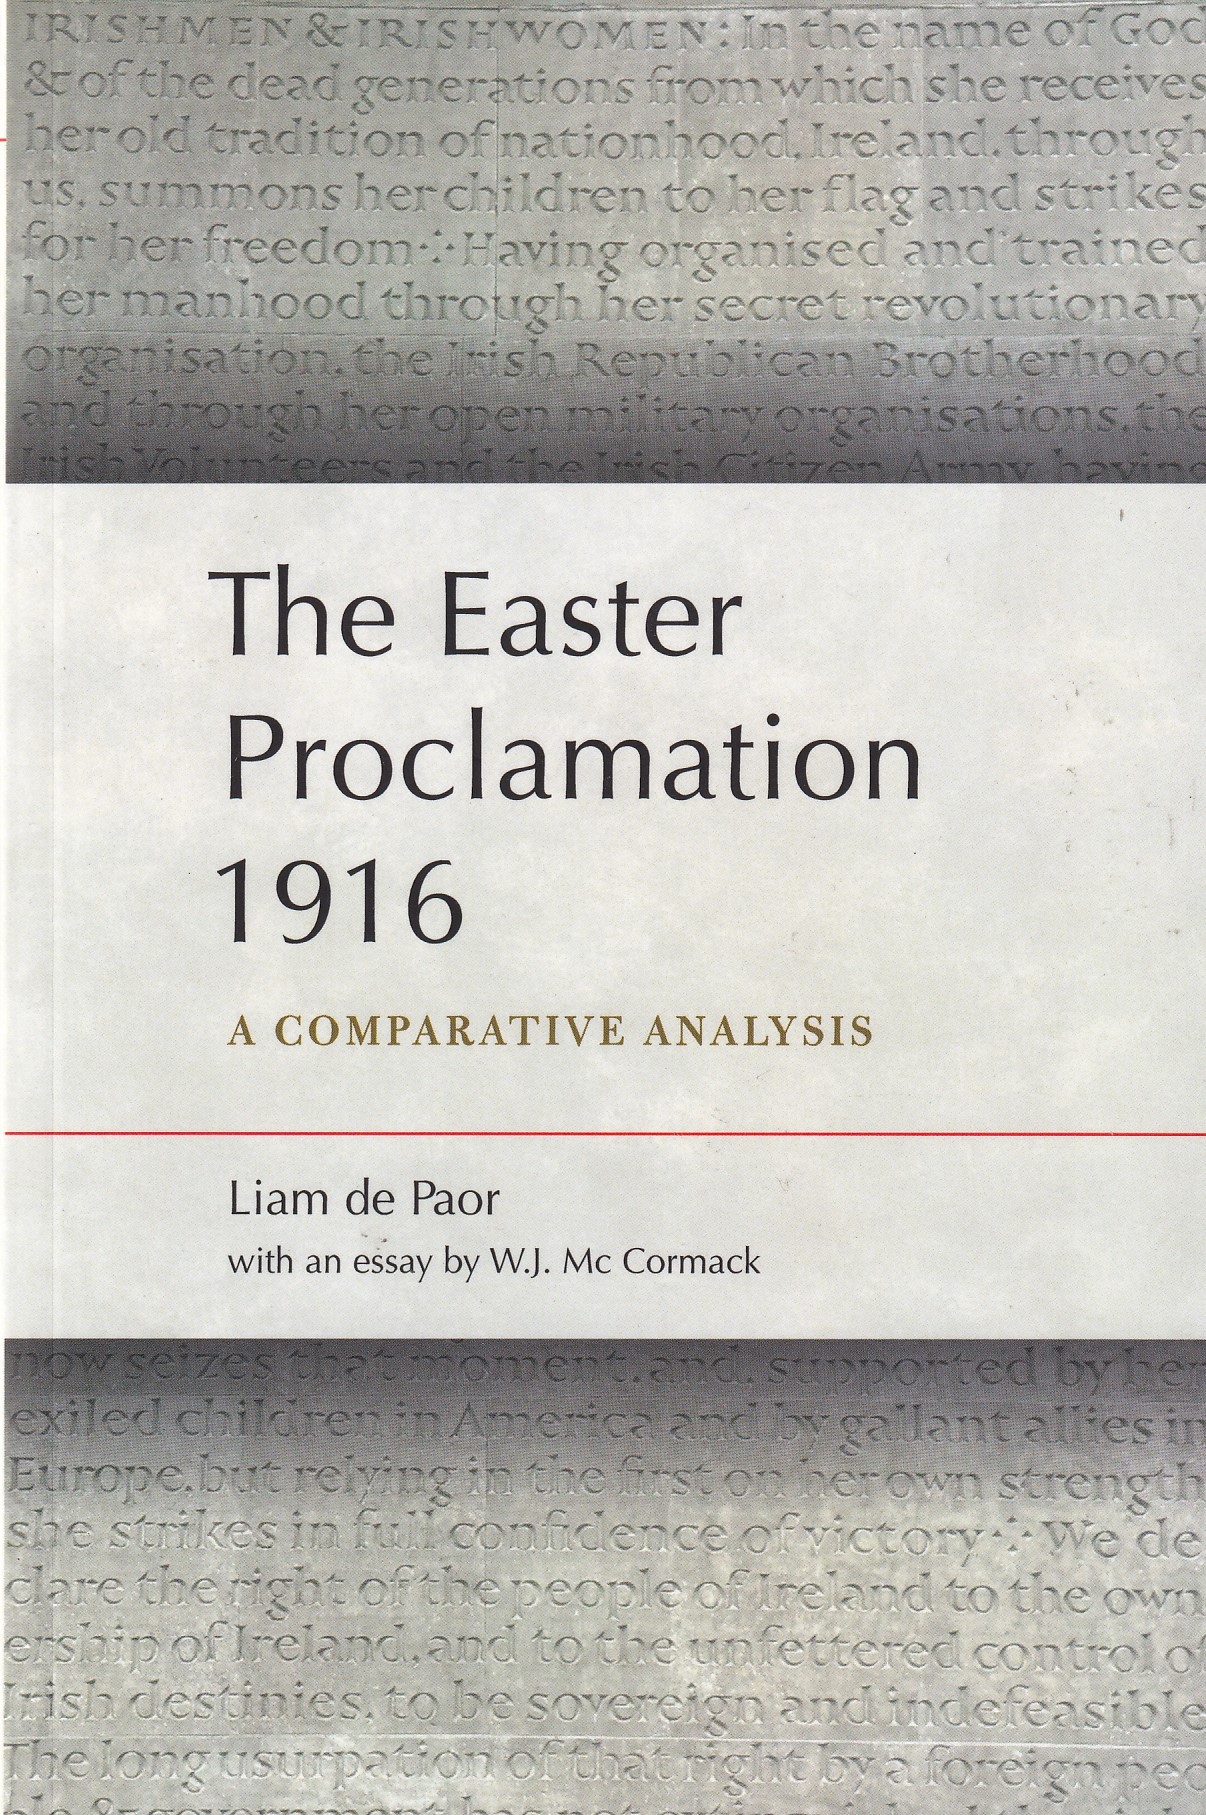 The Easter Proclamation 1916 A comparative analysis by Liam de Paor